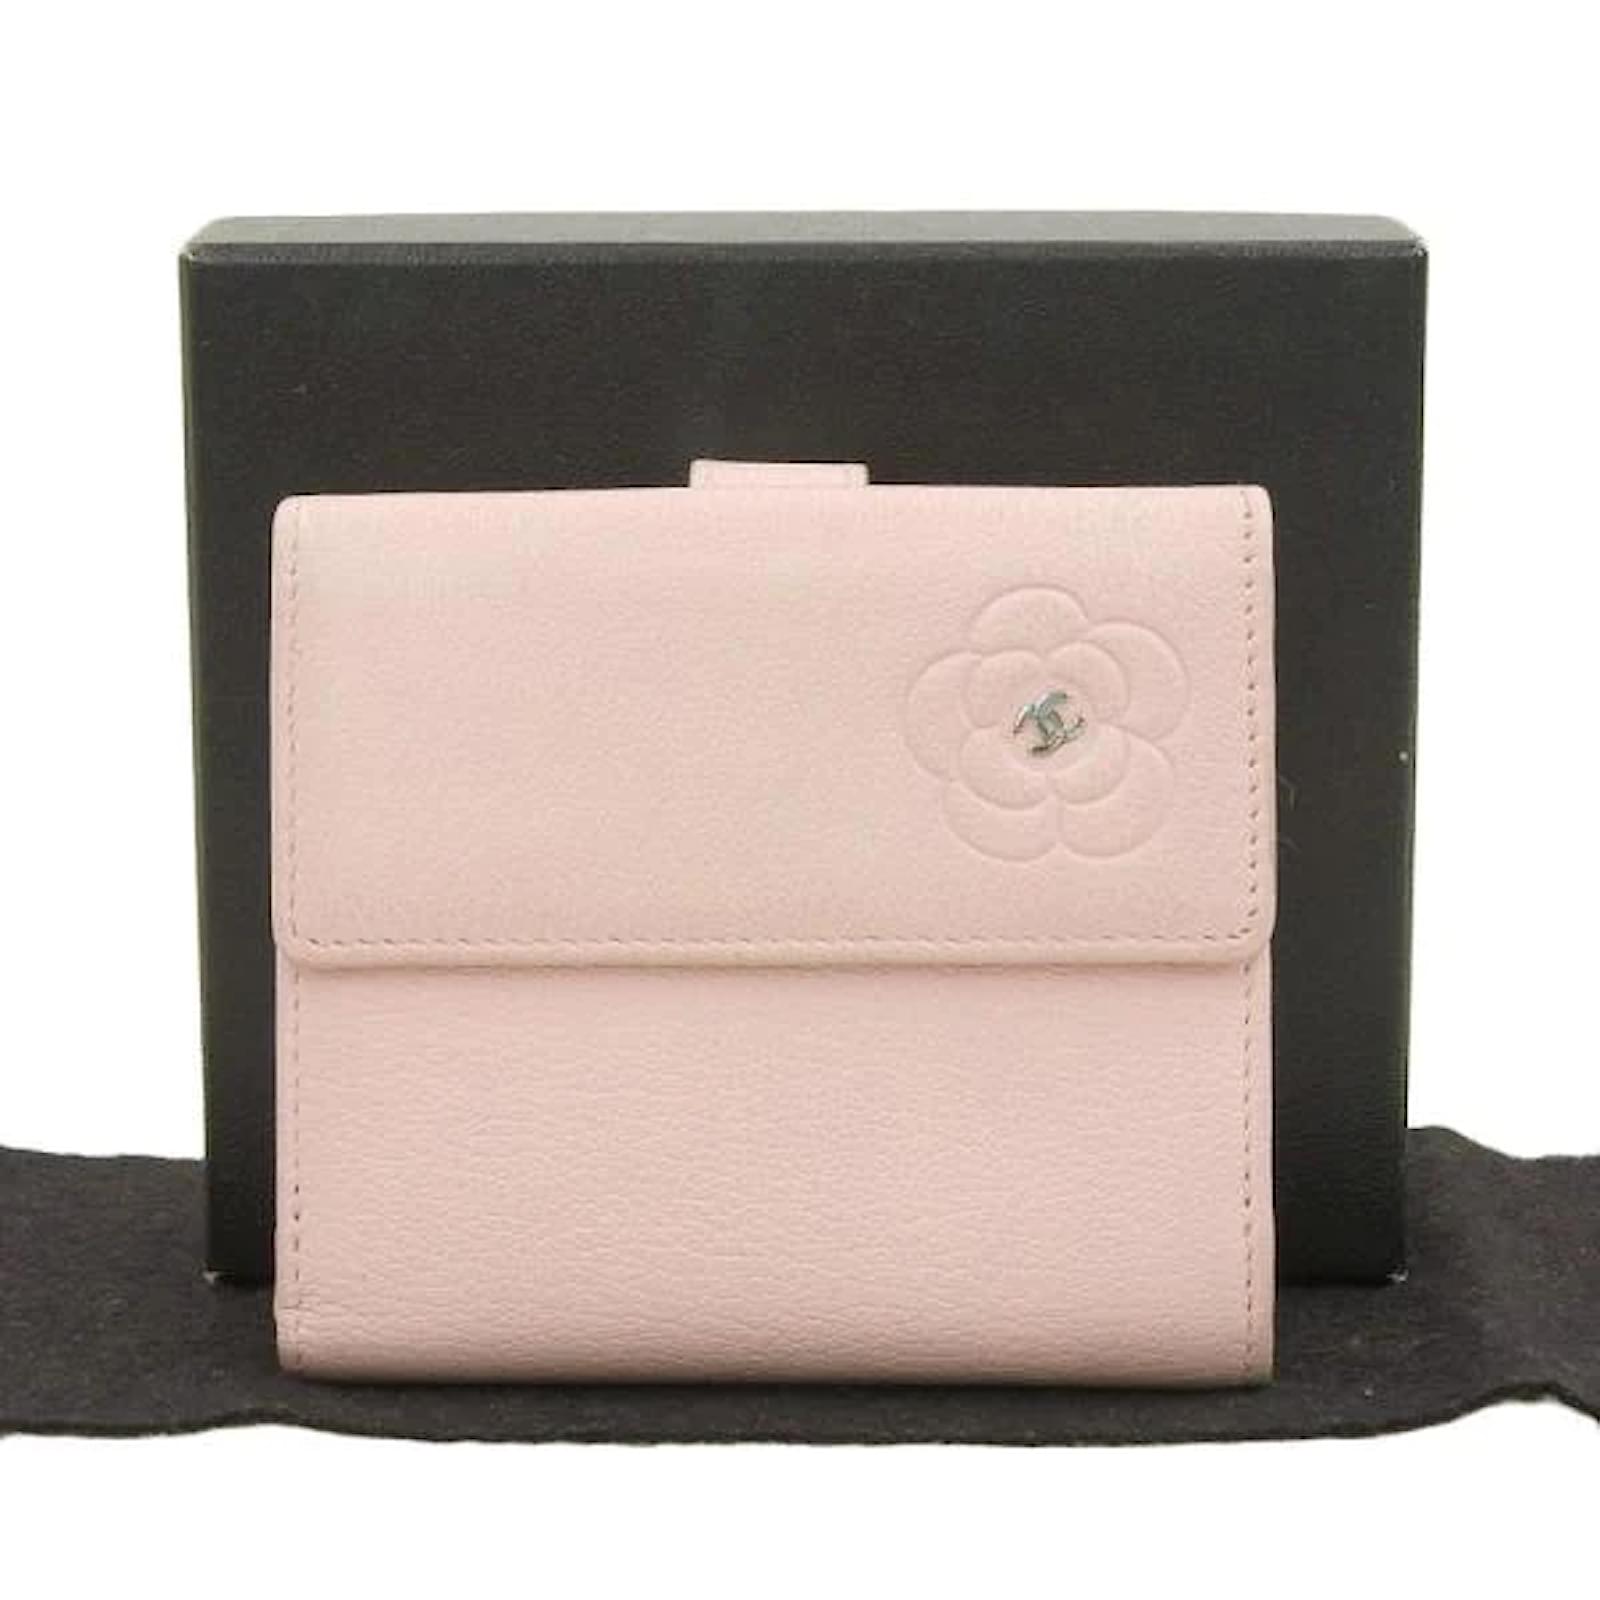 chanel trifold wallet pink leather